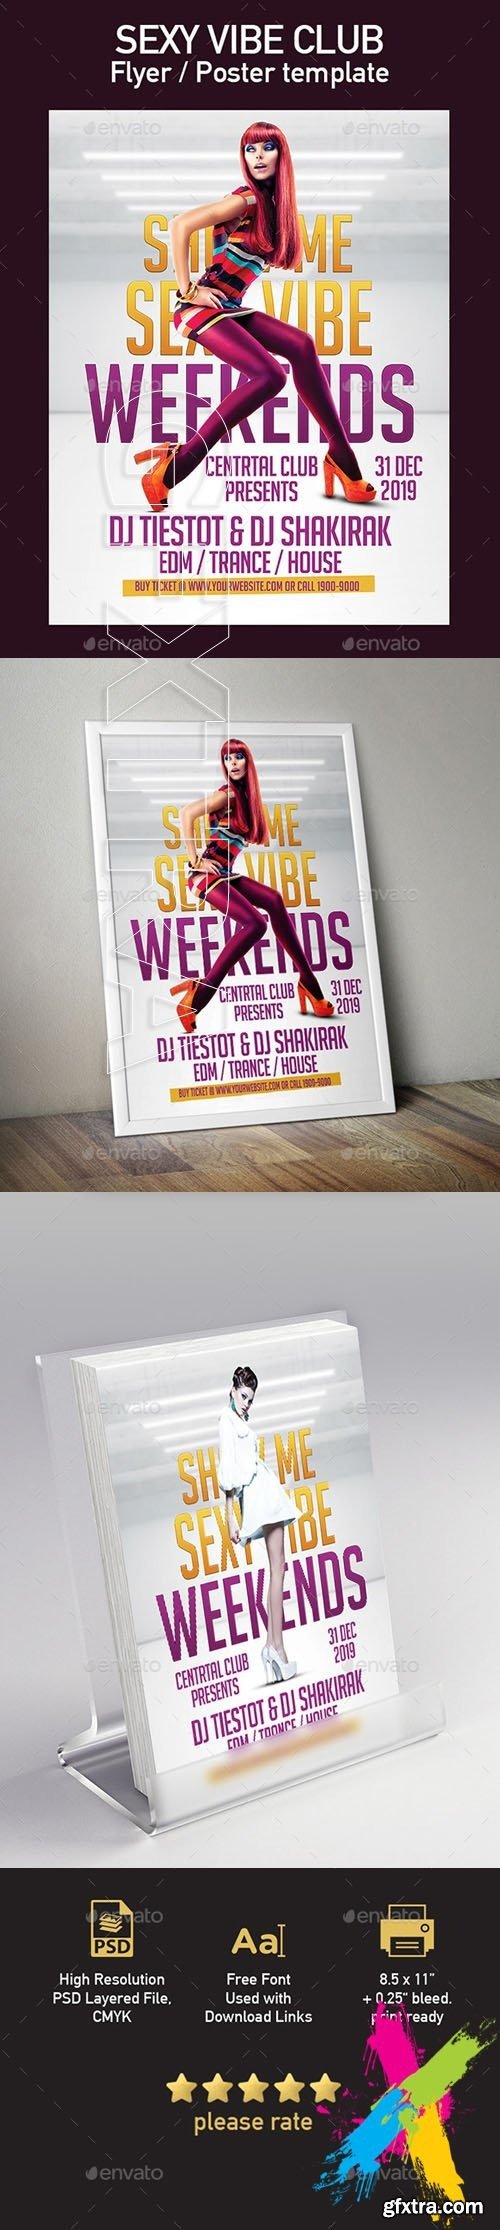 GraphicRiver - Sexy Vibe Club Flyer Poster Template 20413867